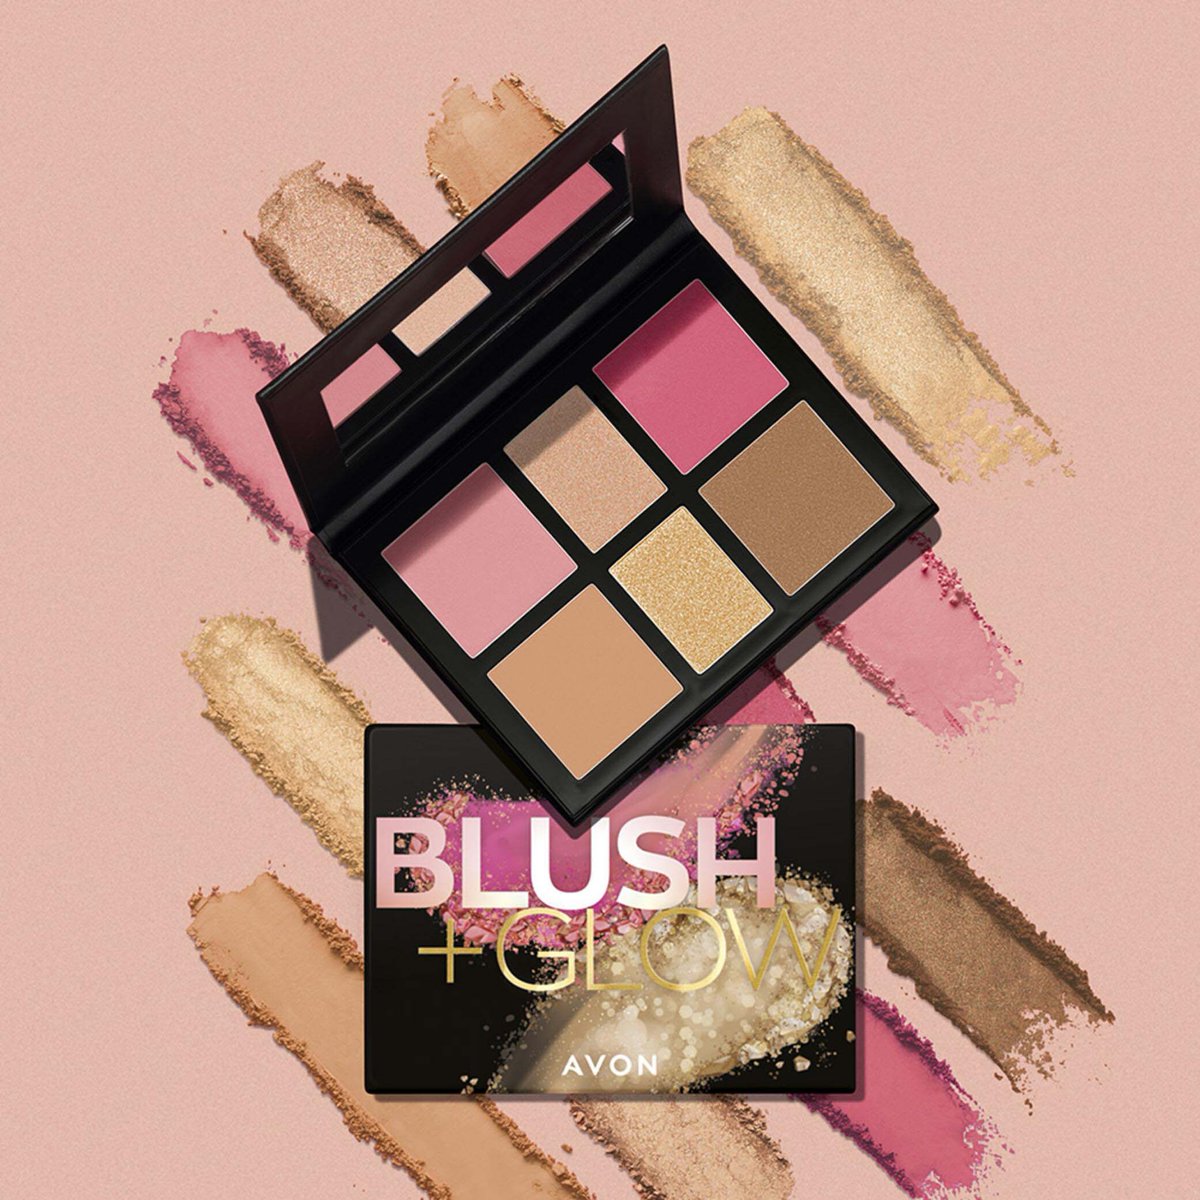 An all-purpose palette is such a must have, especially if you love to take your make-up on the go and don't want tons of products rattling around in the bottom of your bag.

wu.to/JckJhy
#Palette #ContourAndHighlight #Blush #Avon